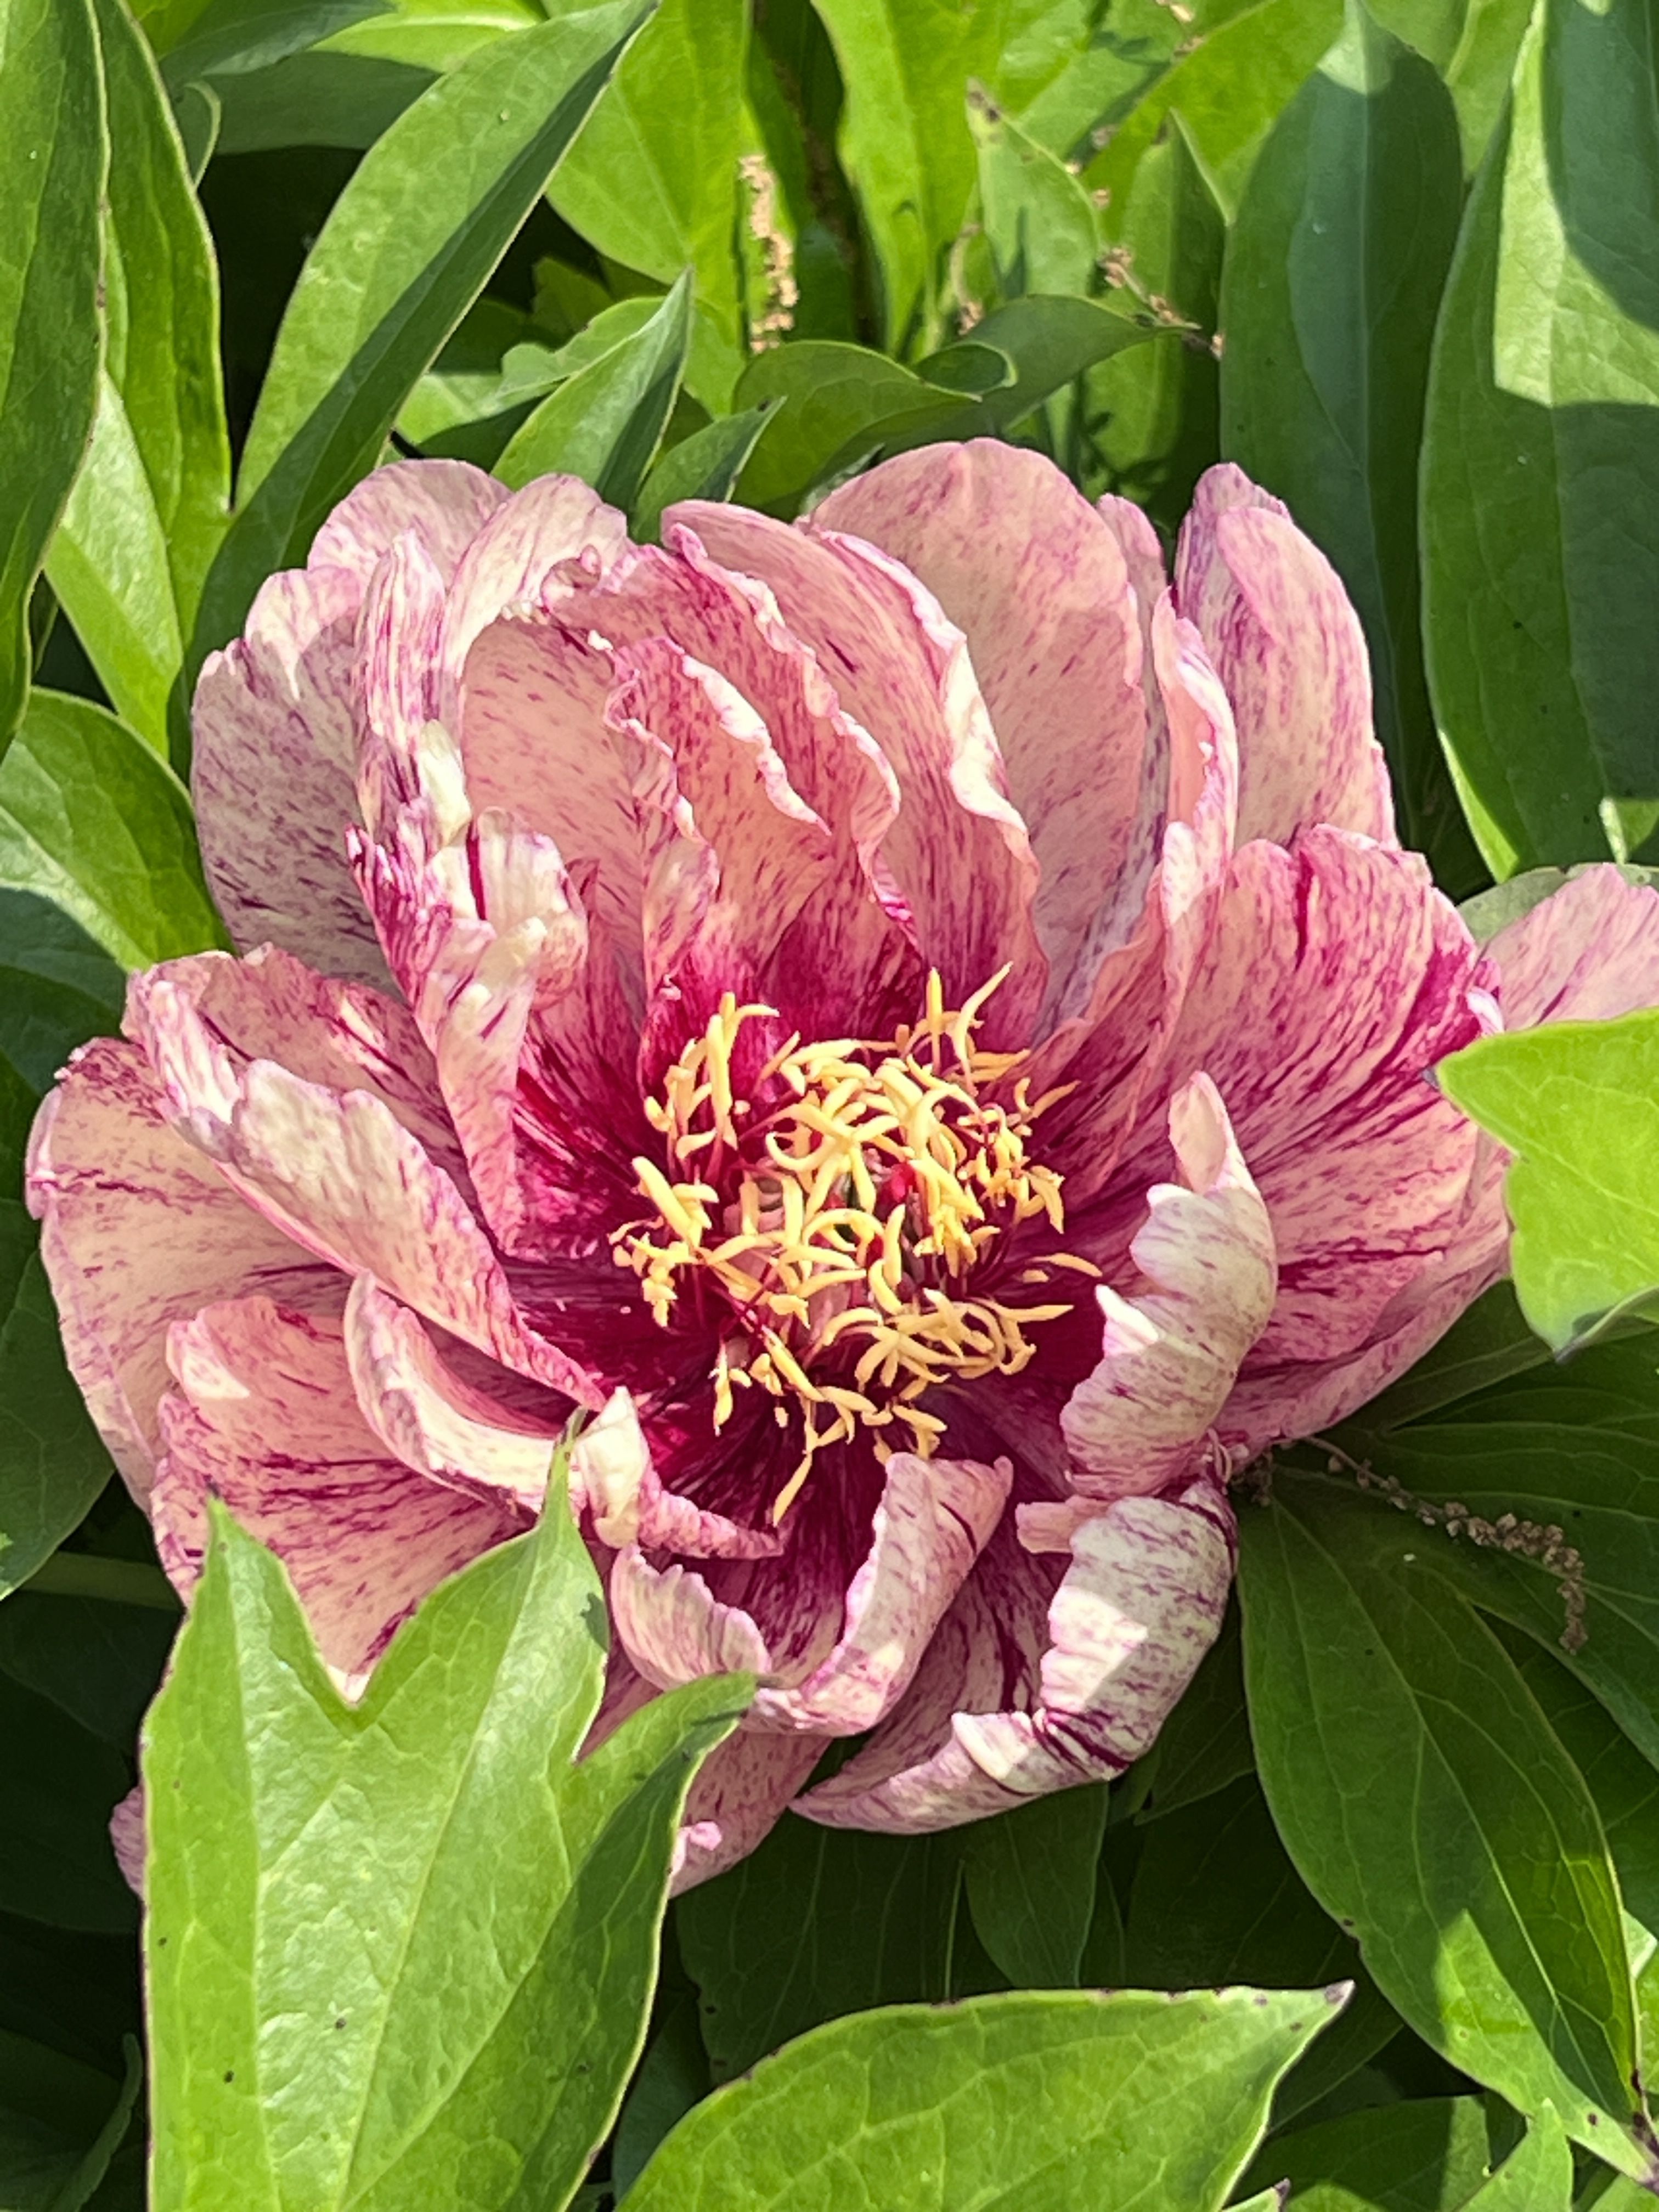 images/plants/paeonia/pae-all-that-jazz/pae-all-that-jazz-0001.JPG